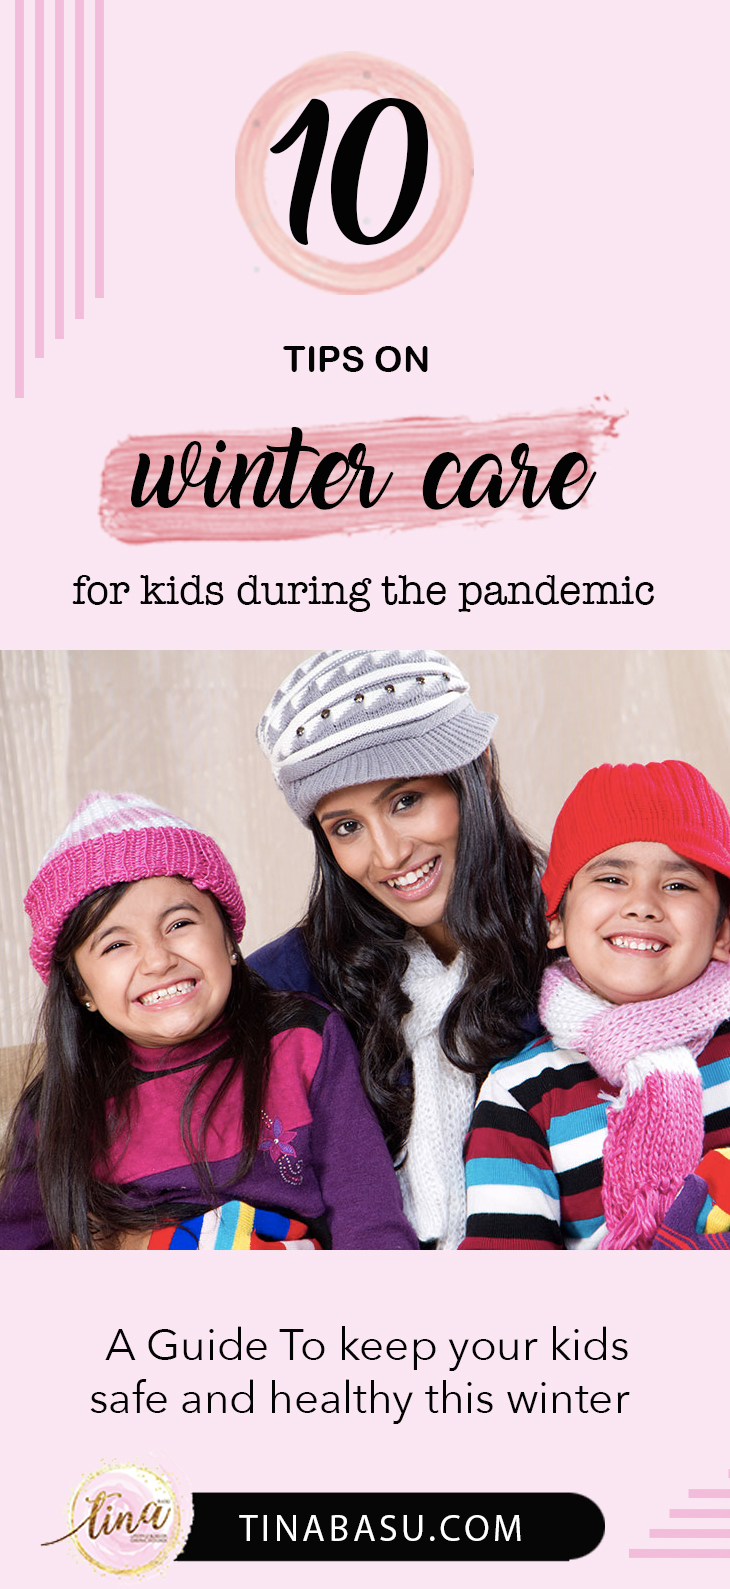 tips on winter care for kids during the pandemic